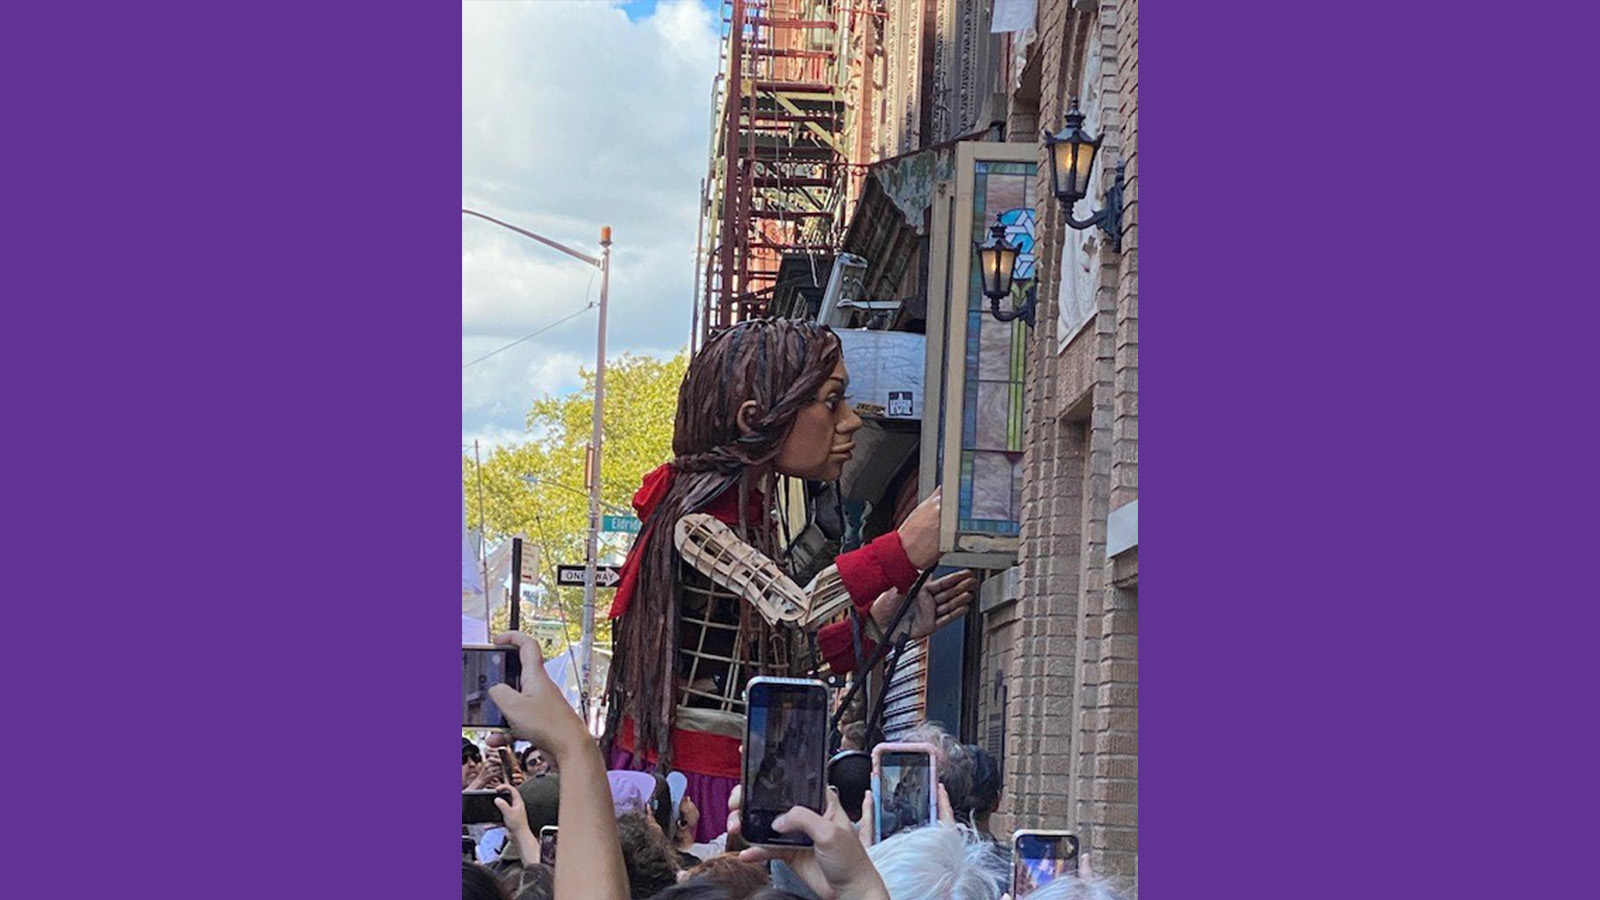 Students from WGSA 29004 Attended a Little Amal Walks NYC Event Sponsored by the Tenement Museum on Orchard Street, in the Lower East Side. The Over-Size Puppet Represents the Plight of Refugee Children Around the World (Fall, 2022)